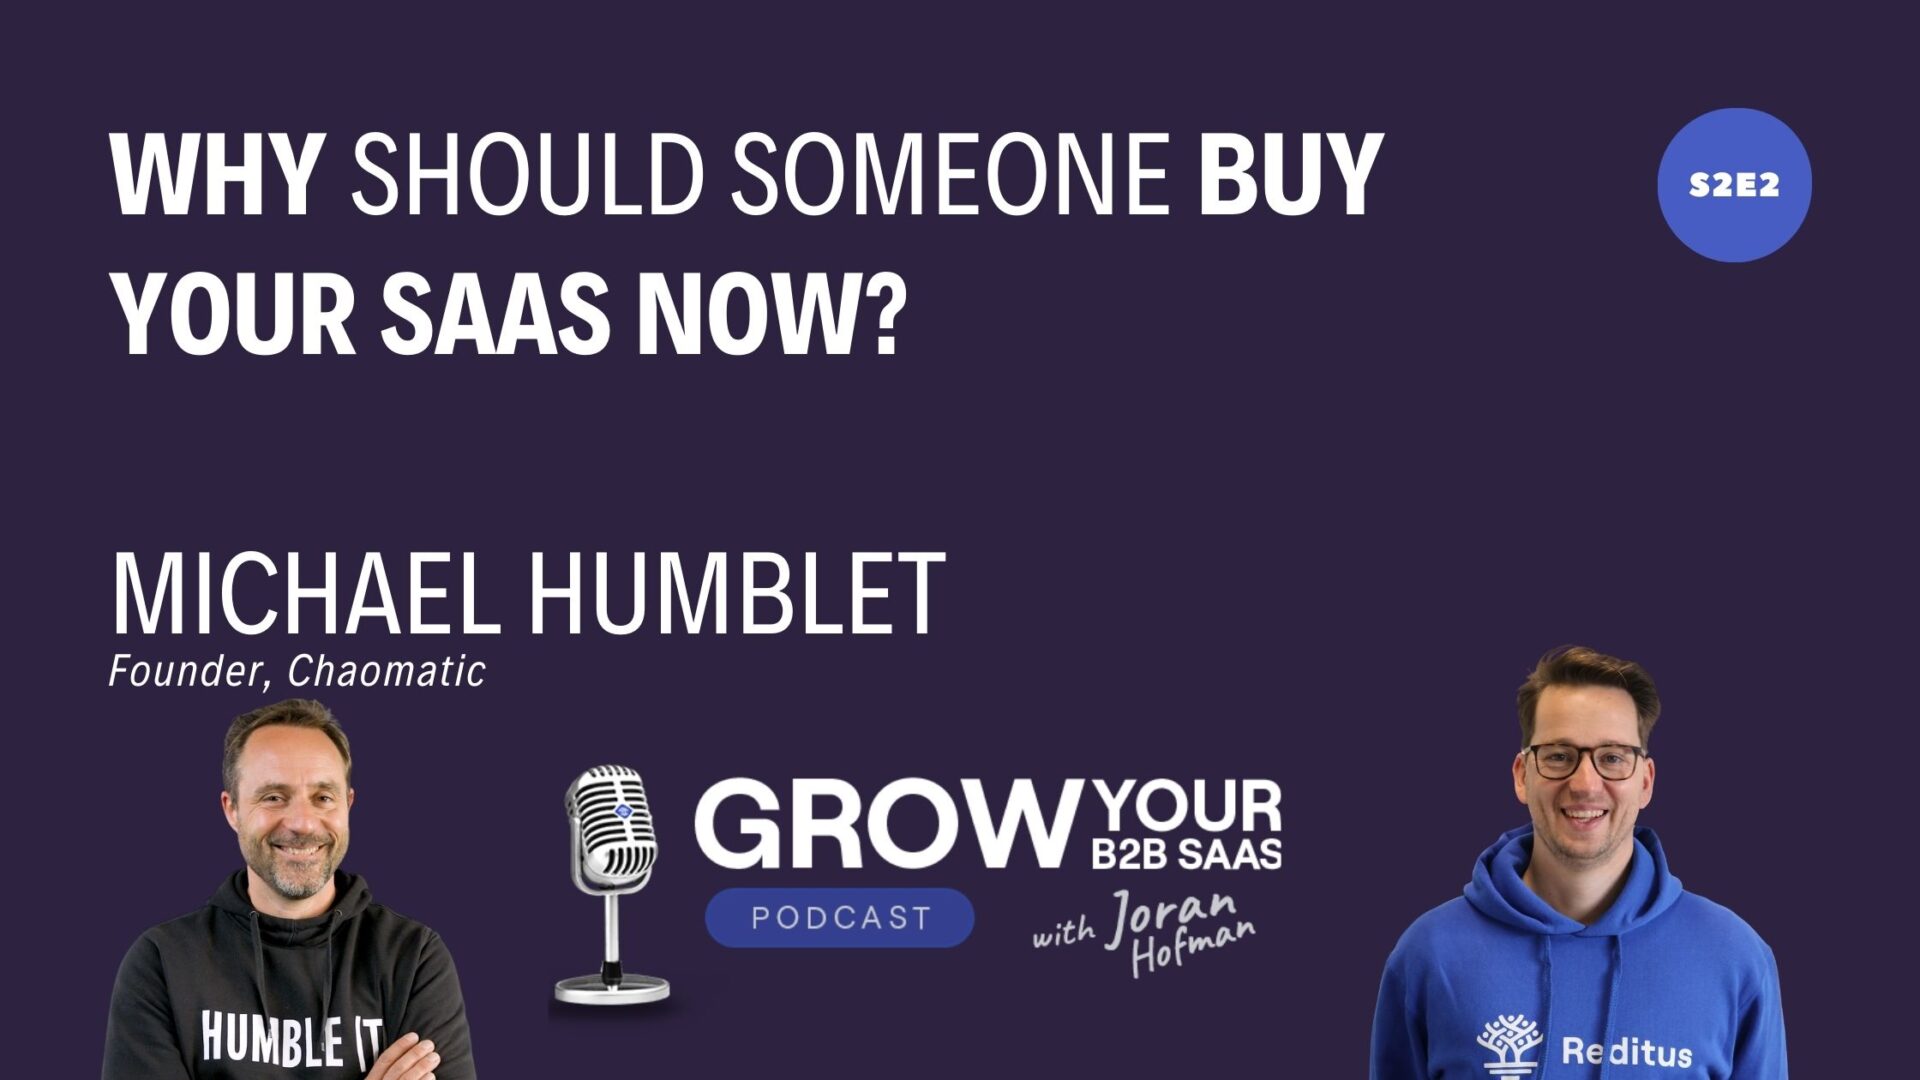 S2E2 – Why should someone buy your SaaS Now? With ⁠Michael Humblet⁠